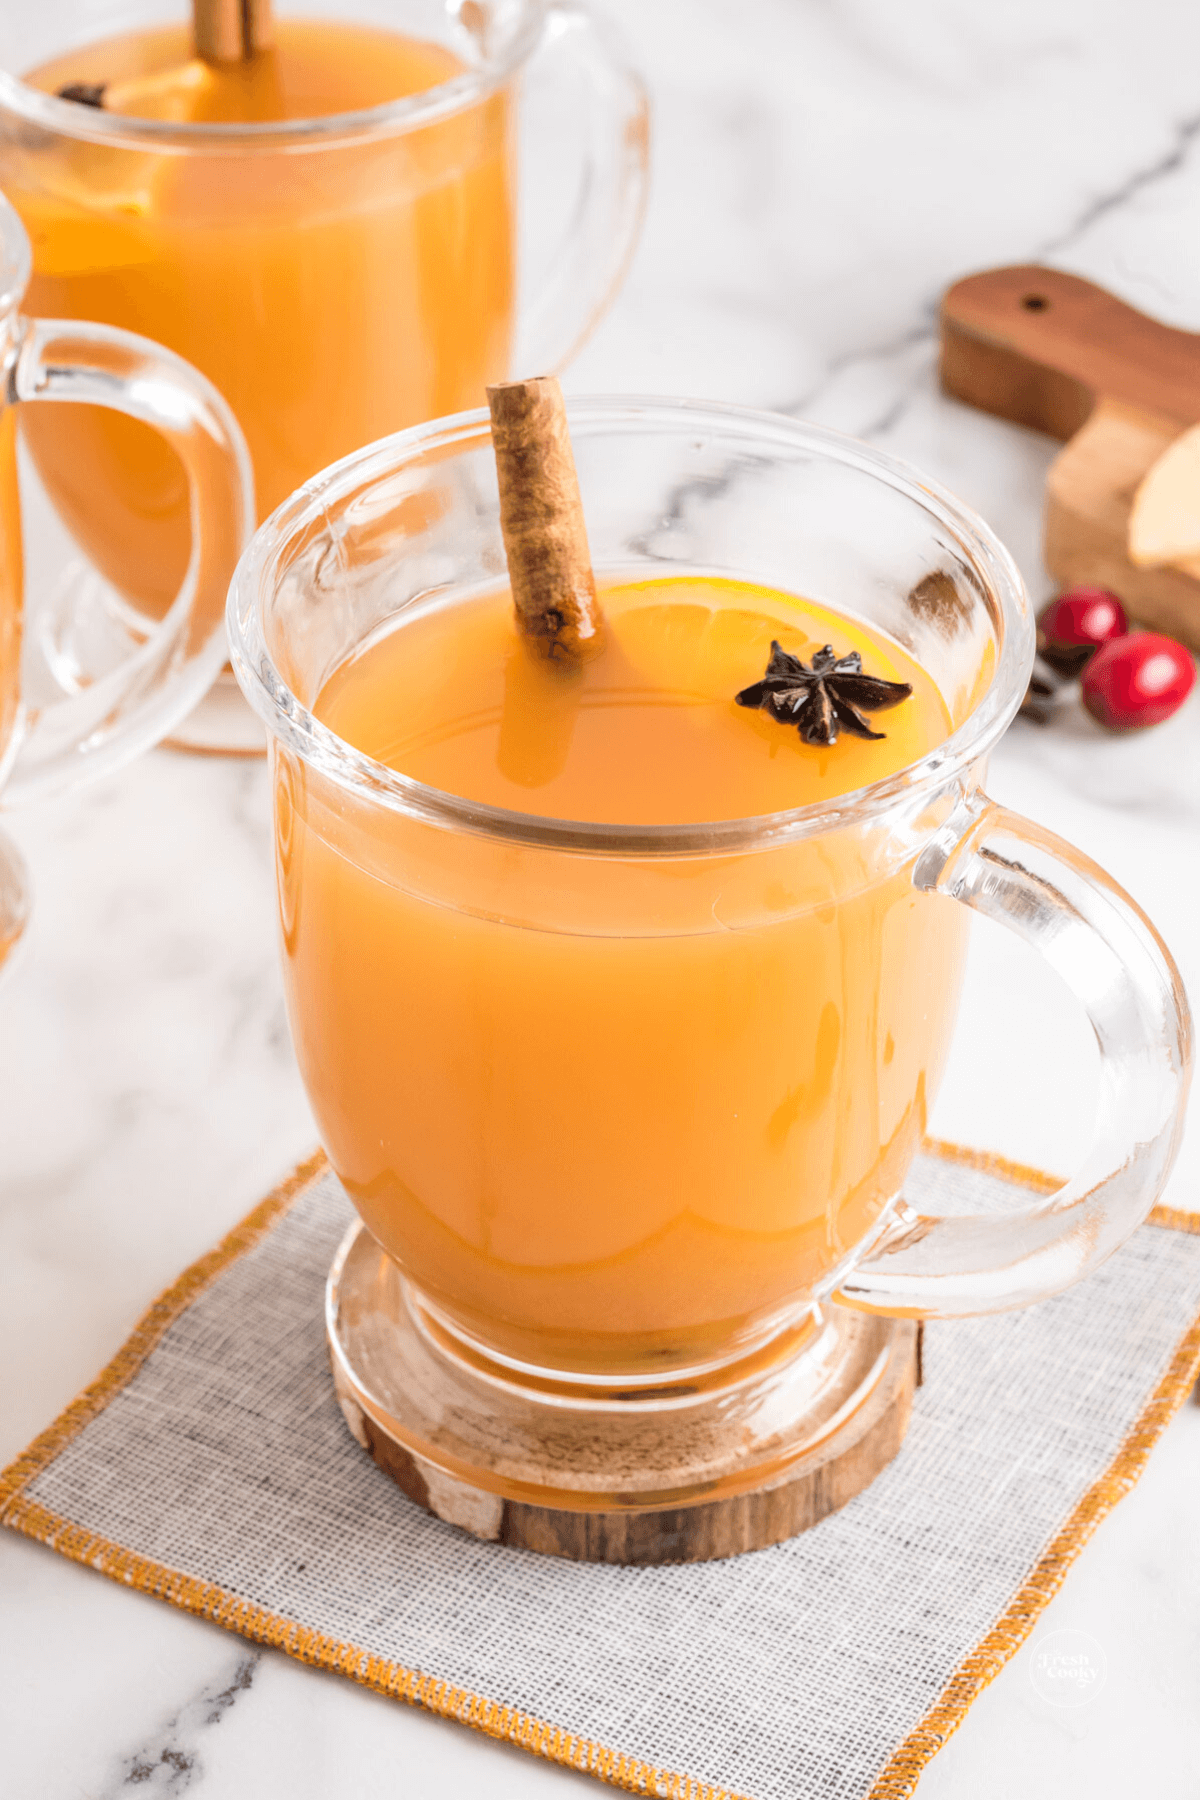 Delicious traditional wassail recipe non-alcoholic in a glass mug with cinnamon stick and star anise.